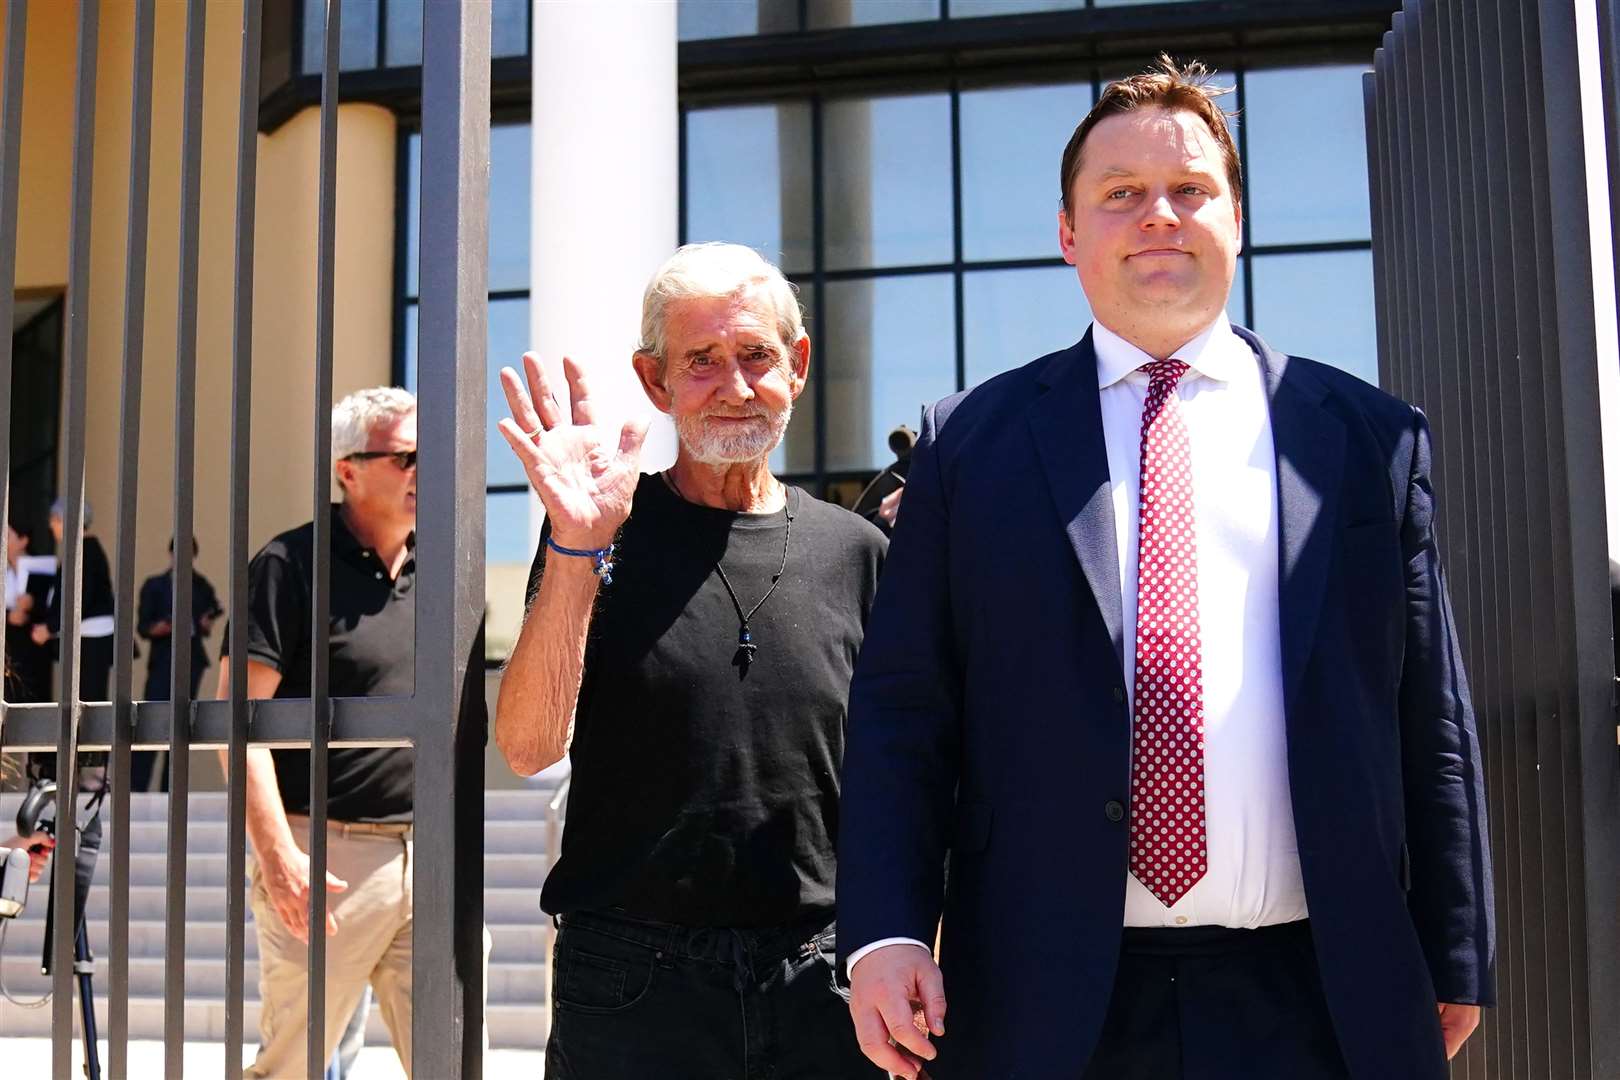 David Hunter (left) with Michael Polak, director of Justice Abroad, leaves Paphos District Court after he was released from custody by Cypriot prison authorities (Victoria Jones/PA)